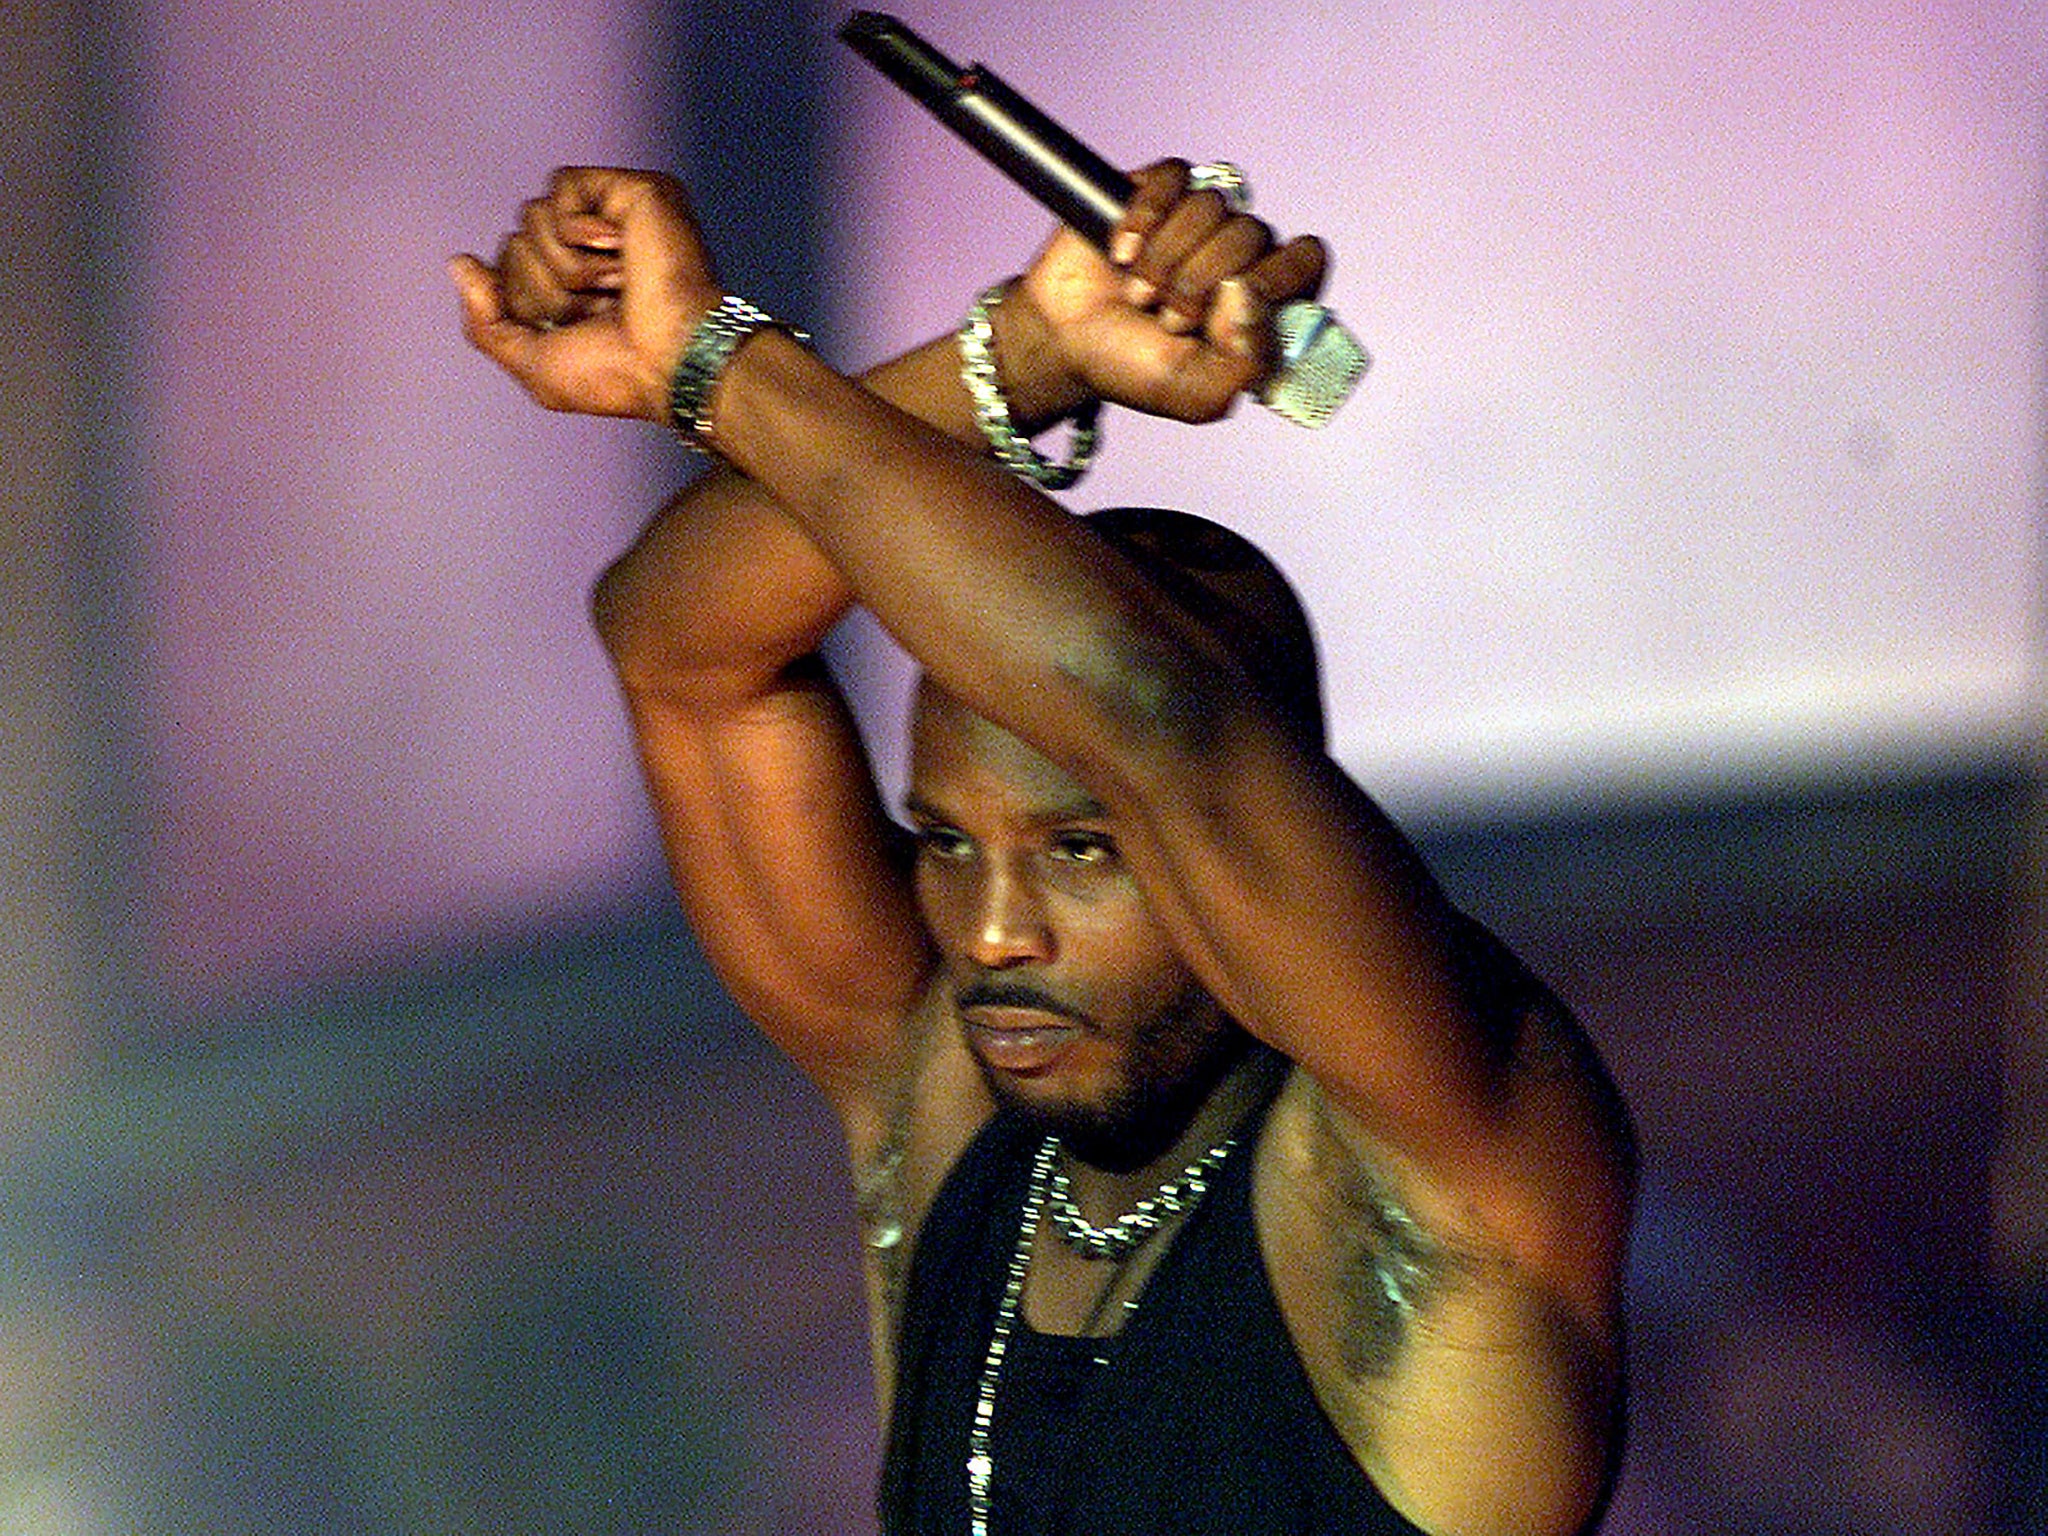 A man who knew he was a work in progress: DMX performs at The Source Awards in 2001